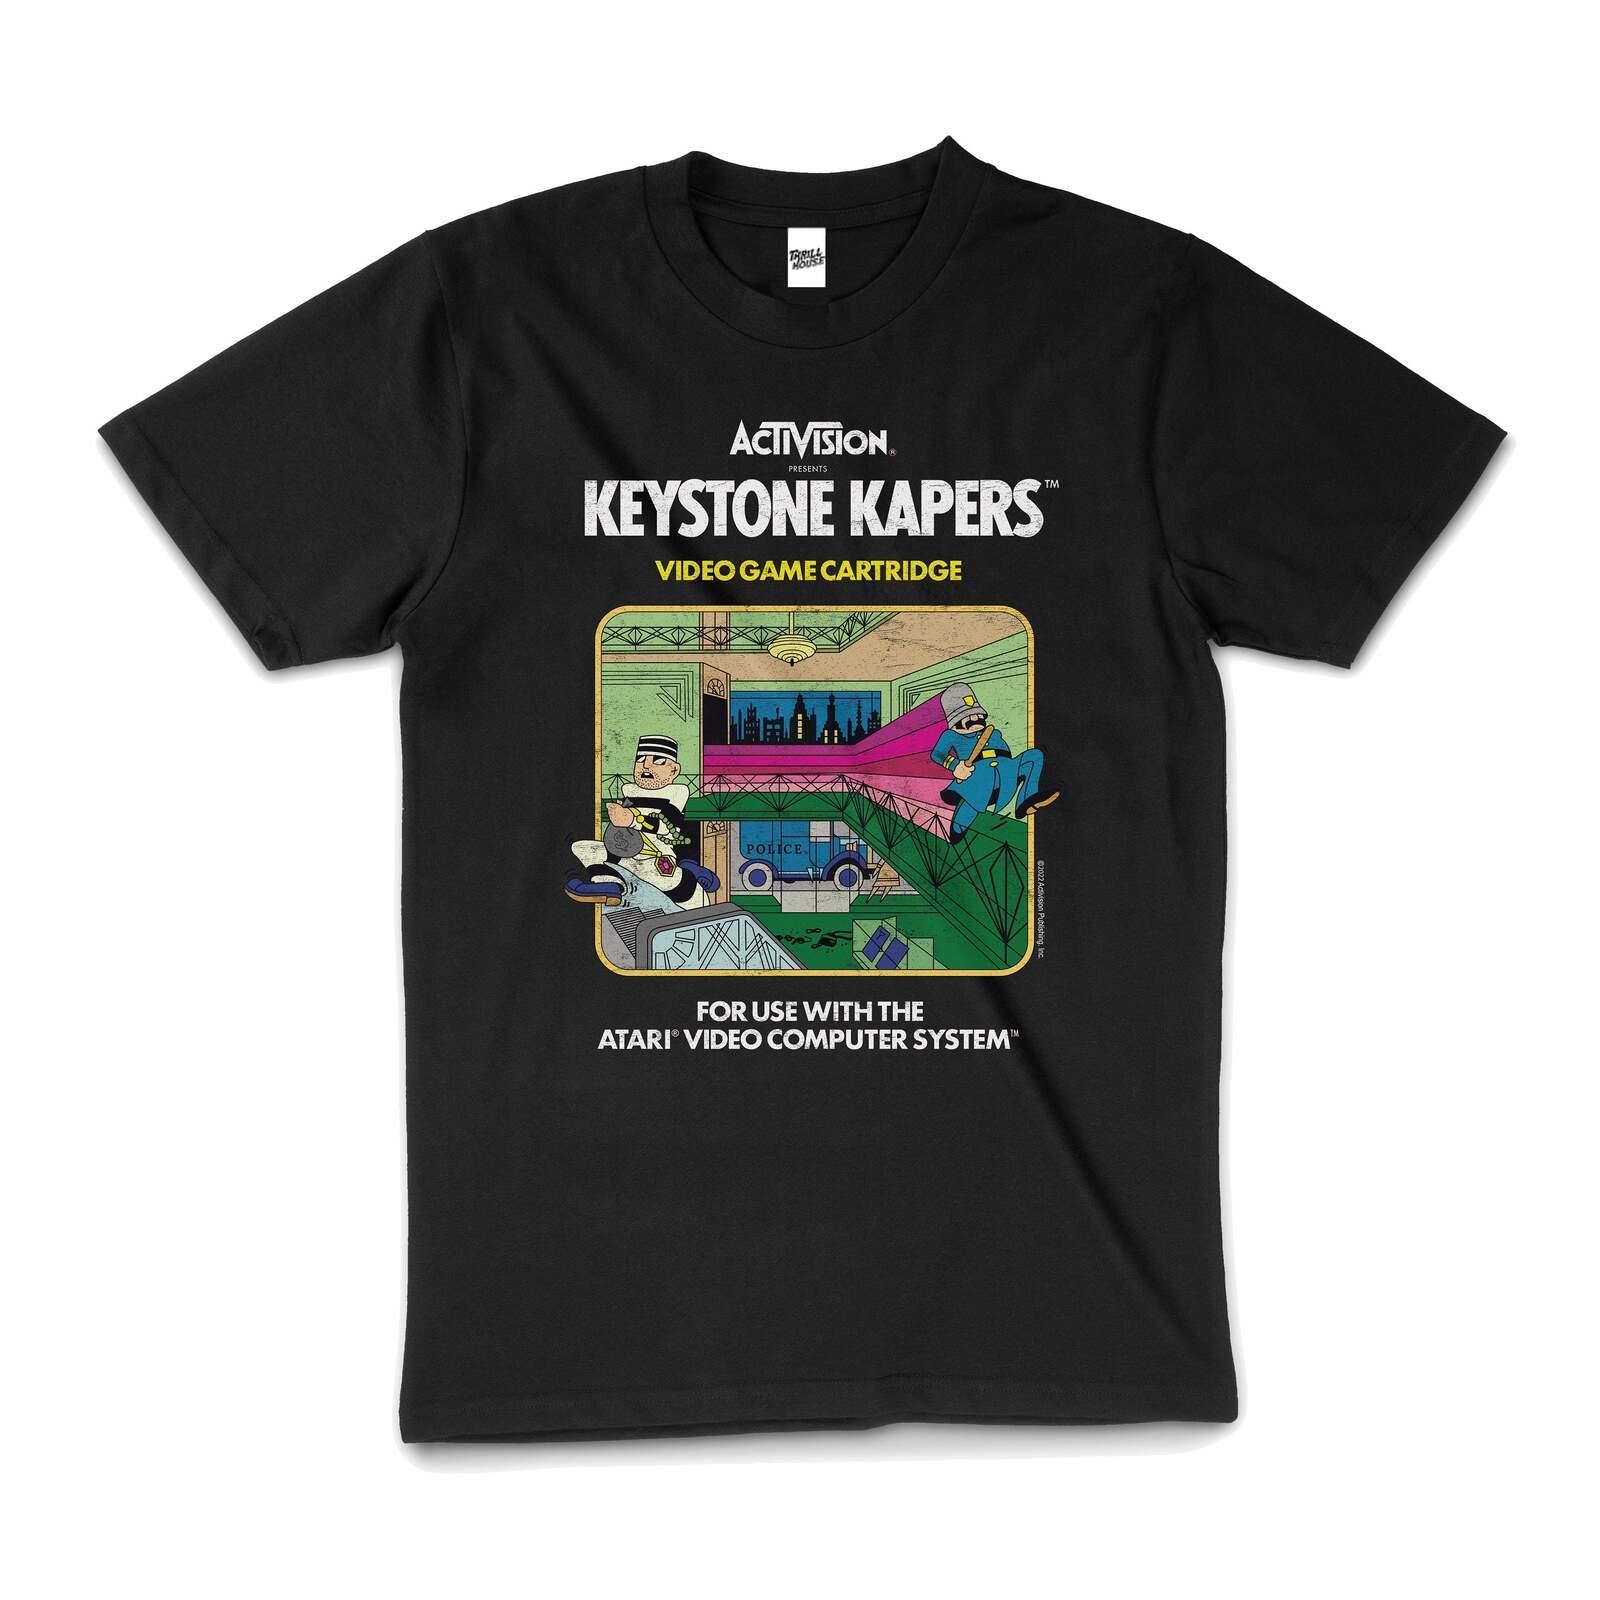 Activision Keystone Kapers 80s Video Game Cotton T-Shirt Unisex Tee Black